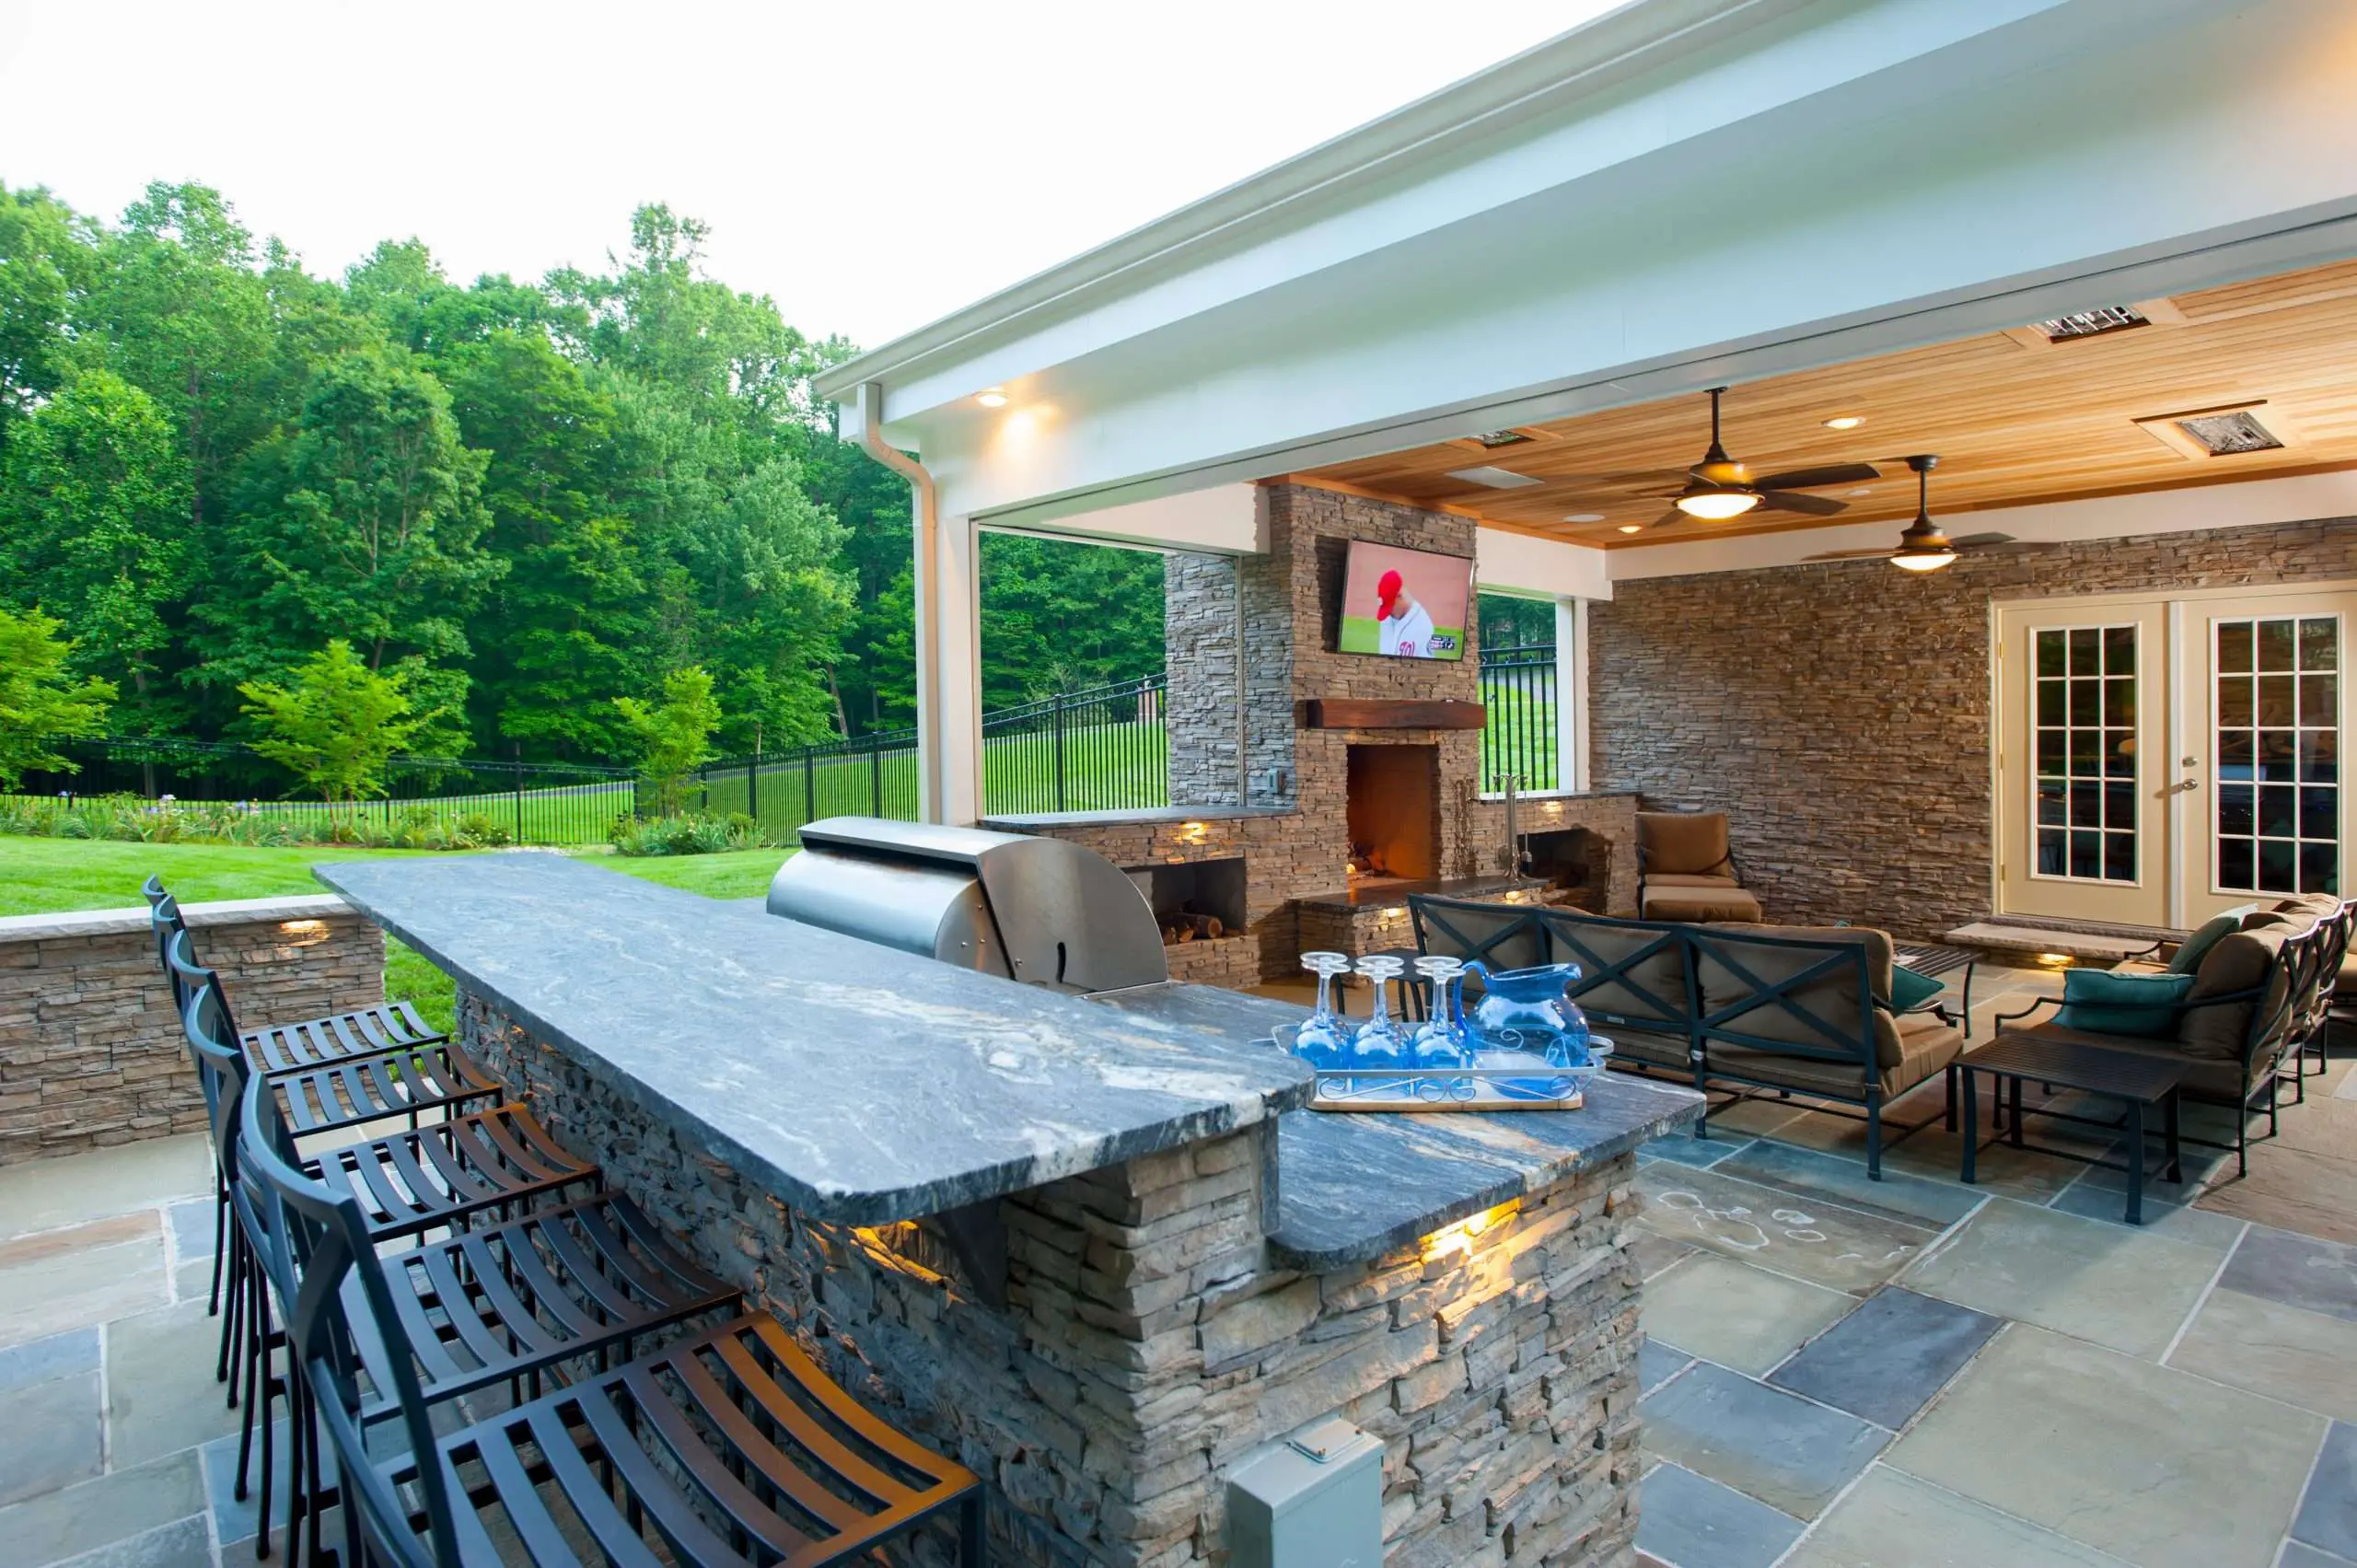 How Much Does a Grill for an Outdoor Kitchen Cost?